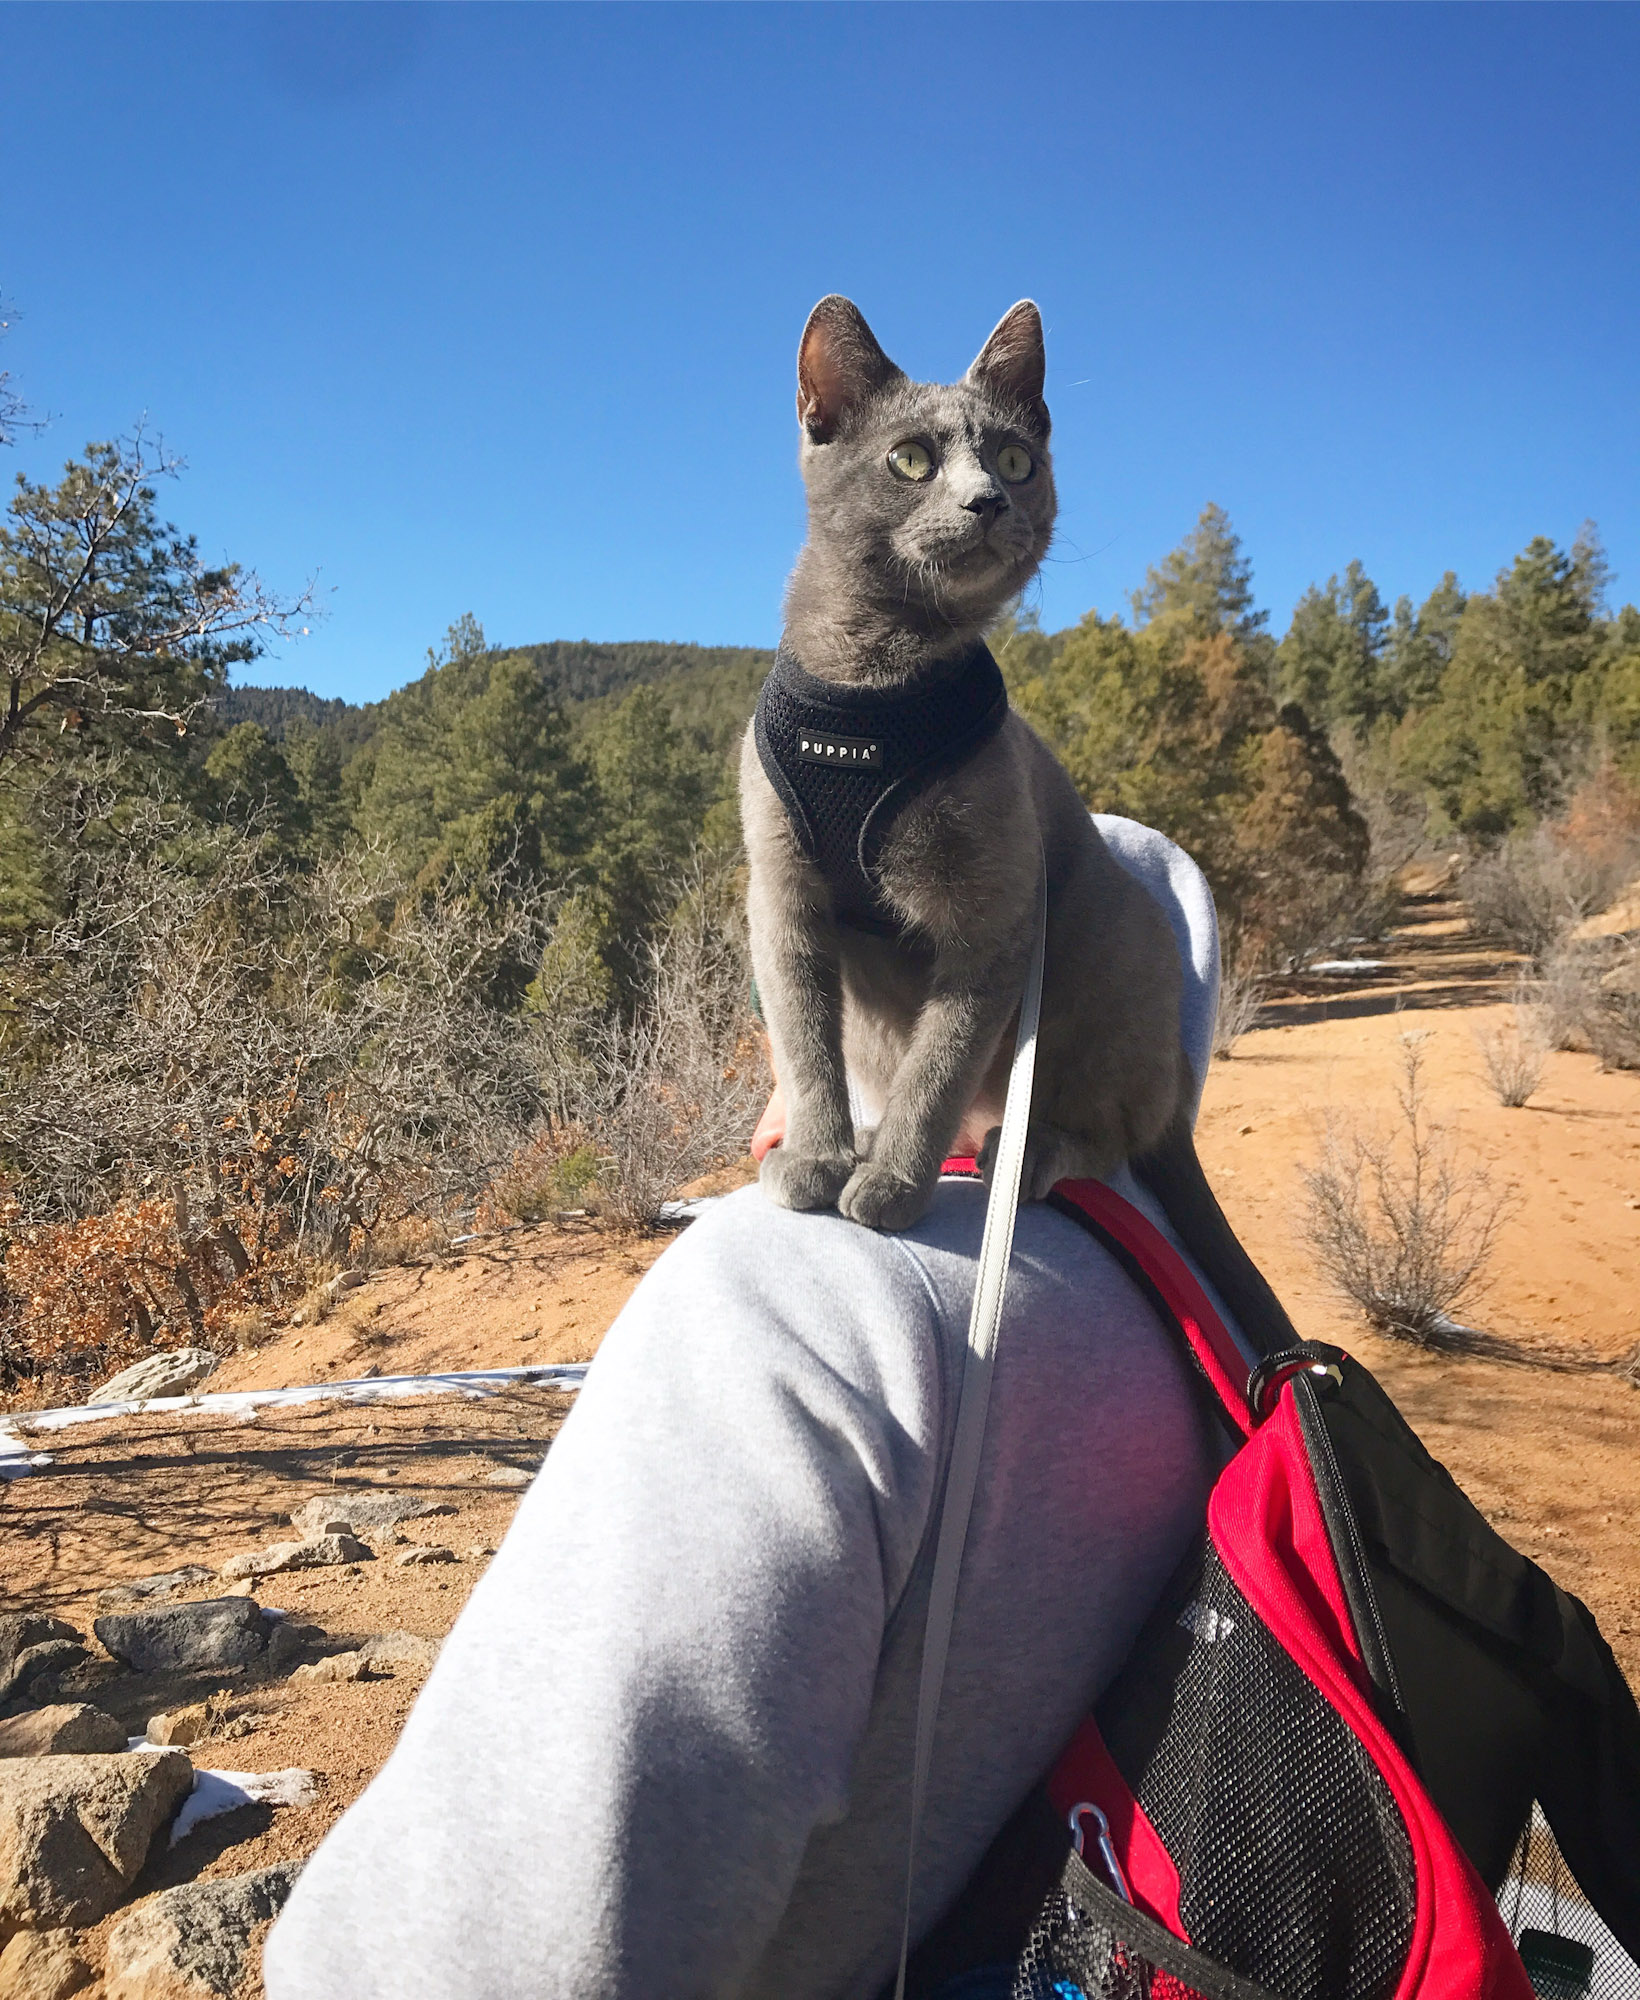 gray adventure cat stands on person's shoulder